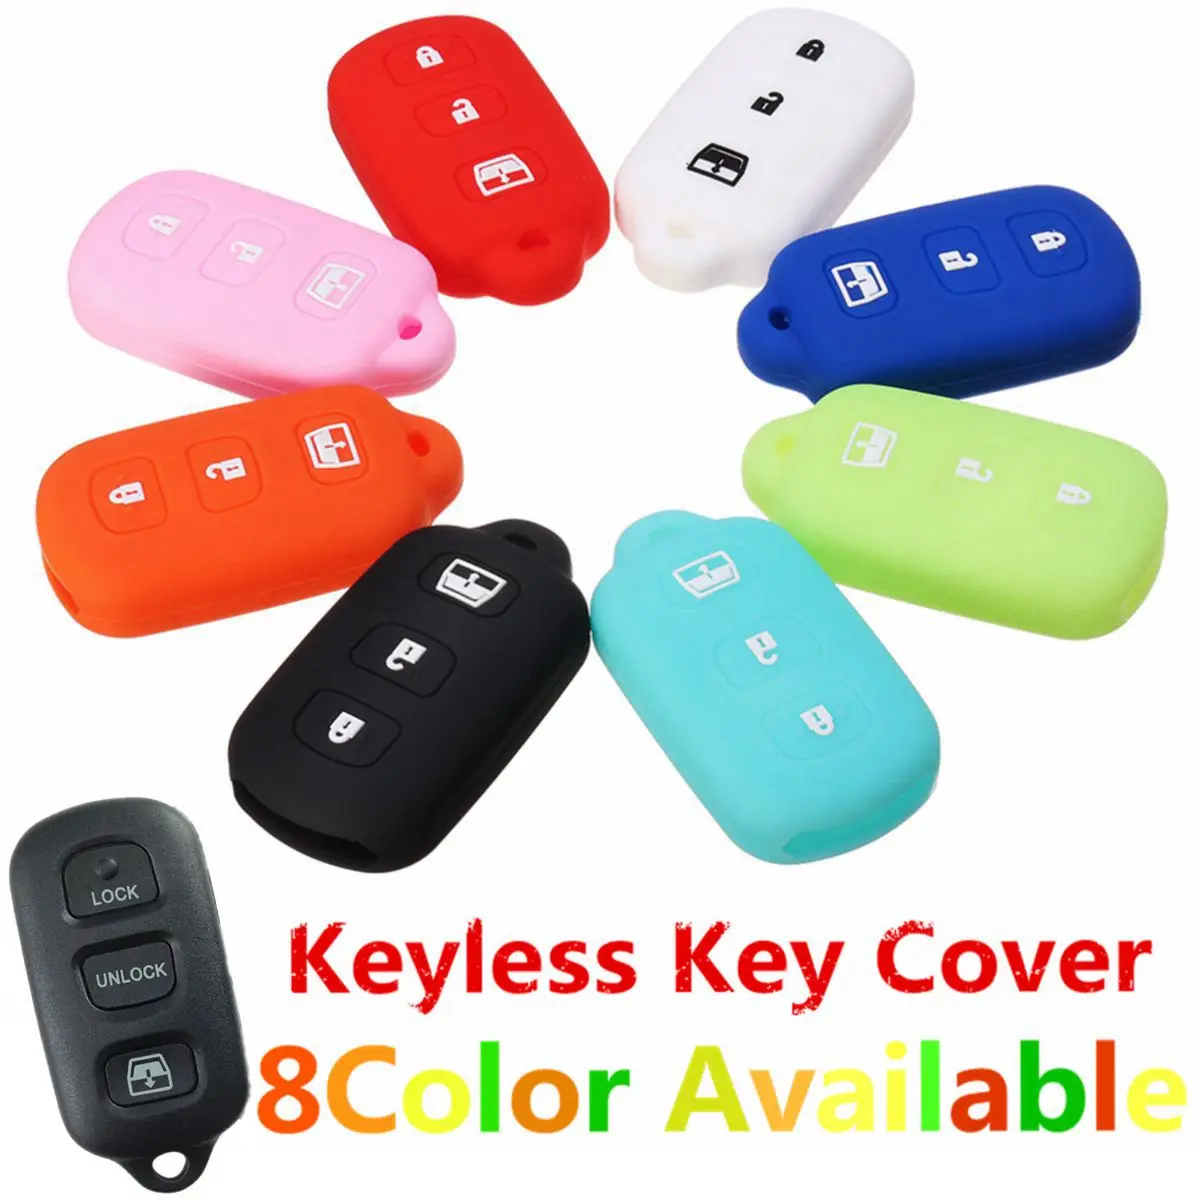 

4 Buttons Silicone Cover Fob Key Case Shell For Toyota 4Runner Sequoia Matrix